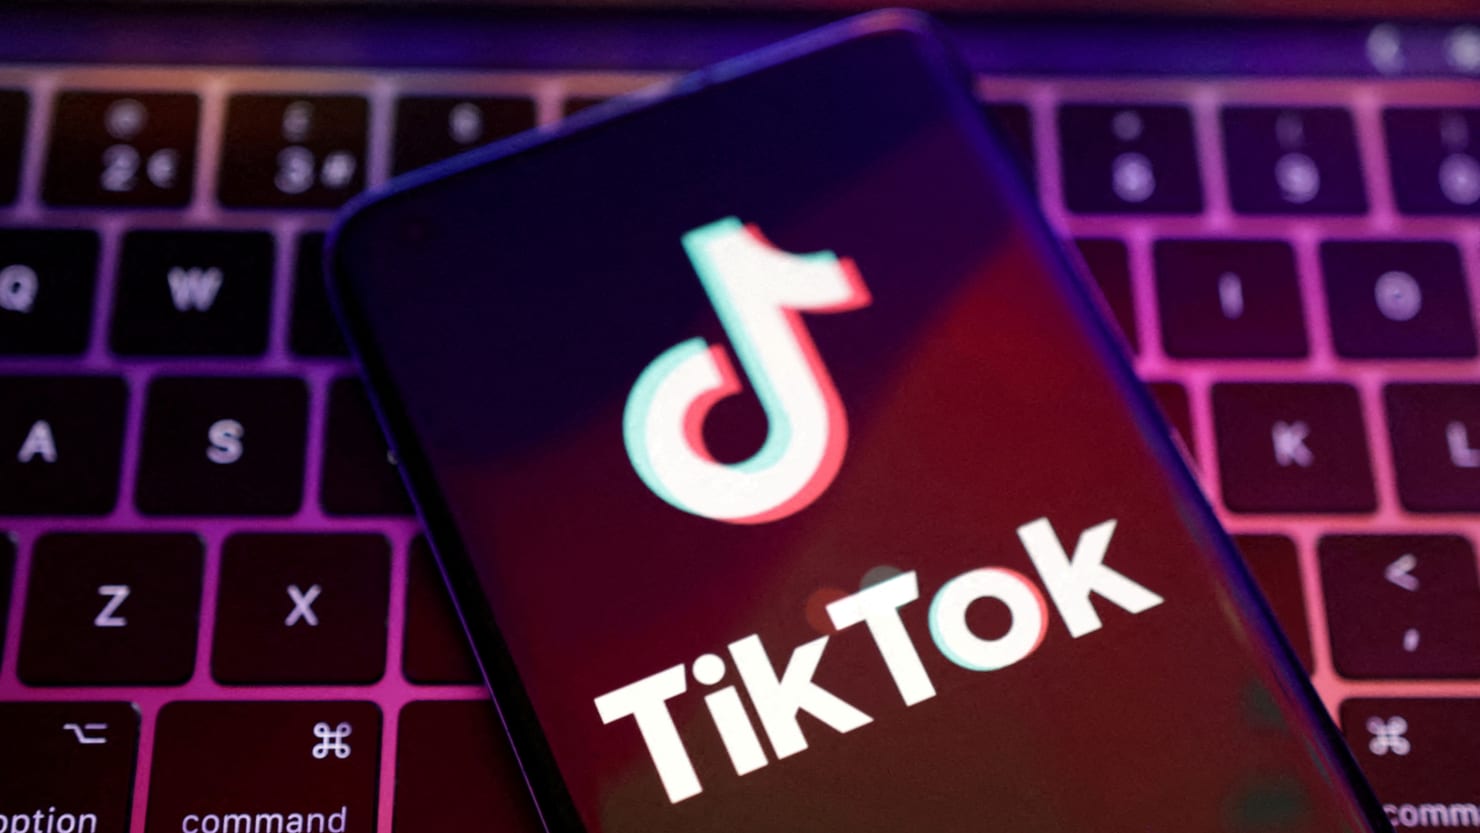 TikTok User Who Vowed to Kill Migrants Had Huge Weapons Cache in 